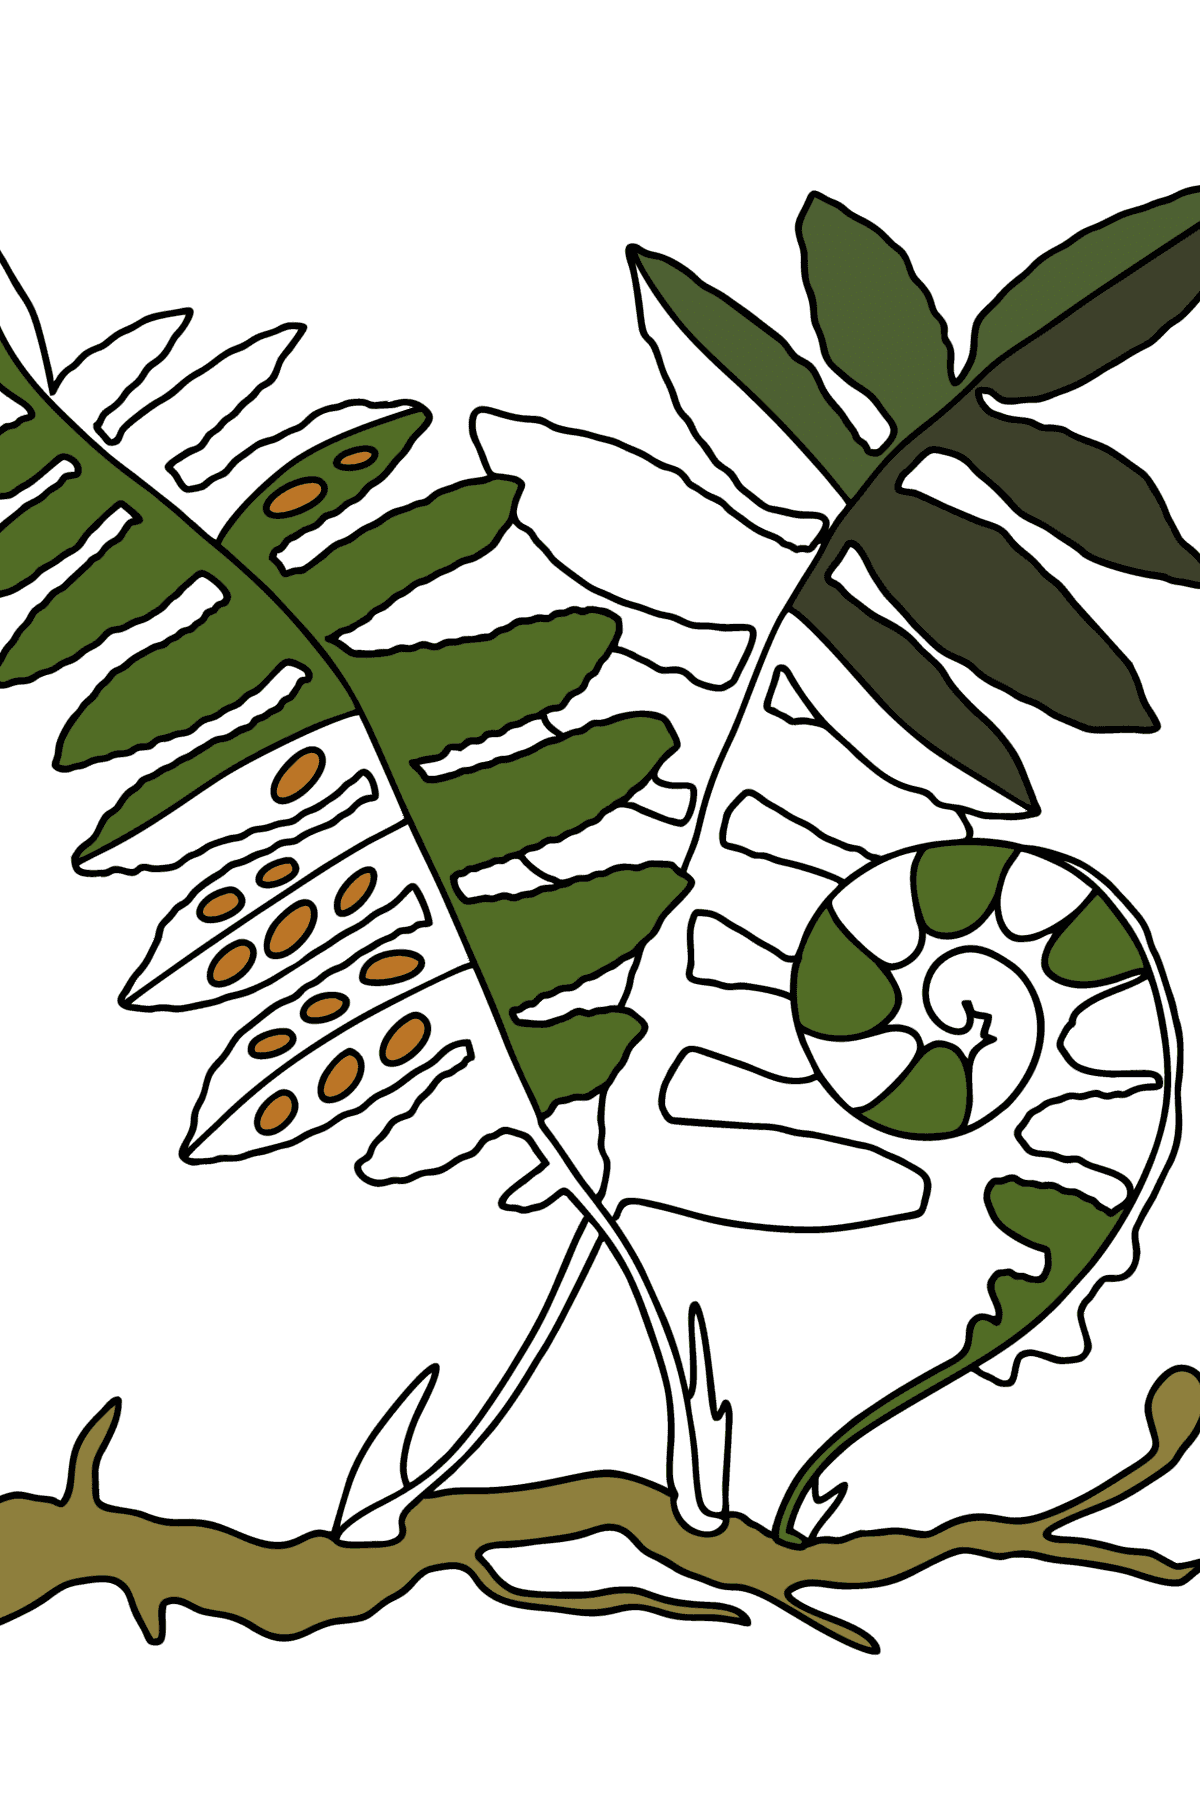 Fern Leaves coloring page - Coloring Pages for Kids